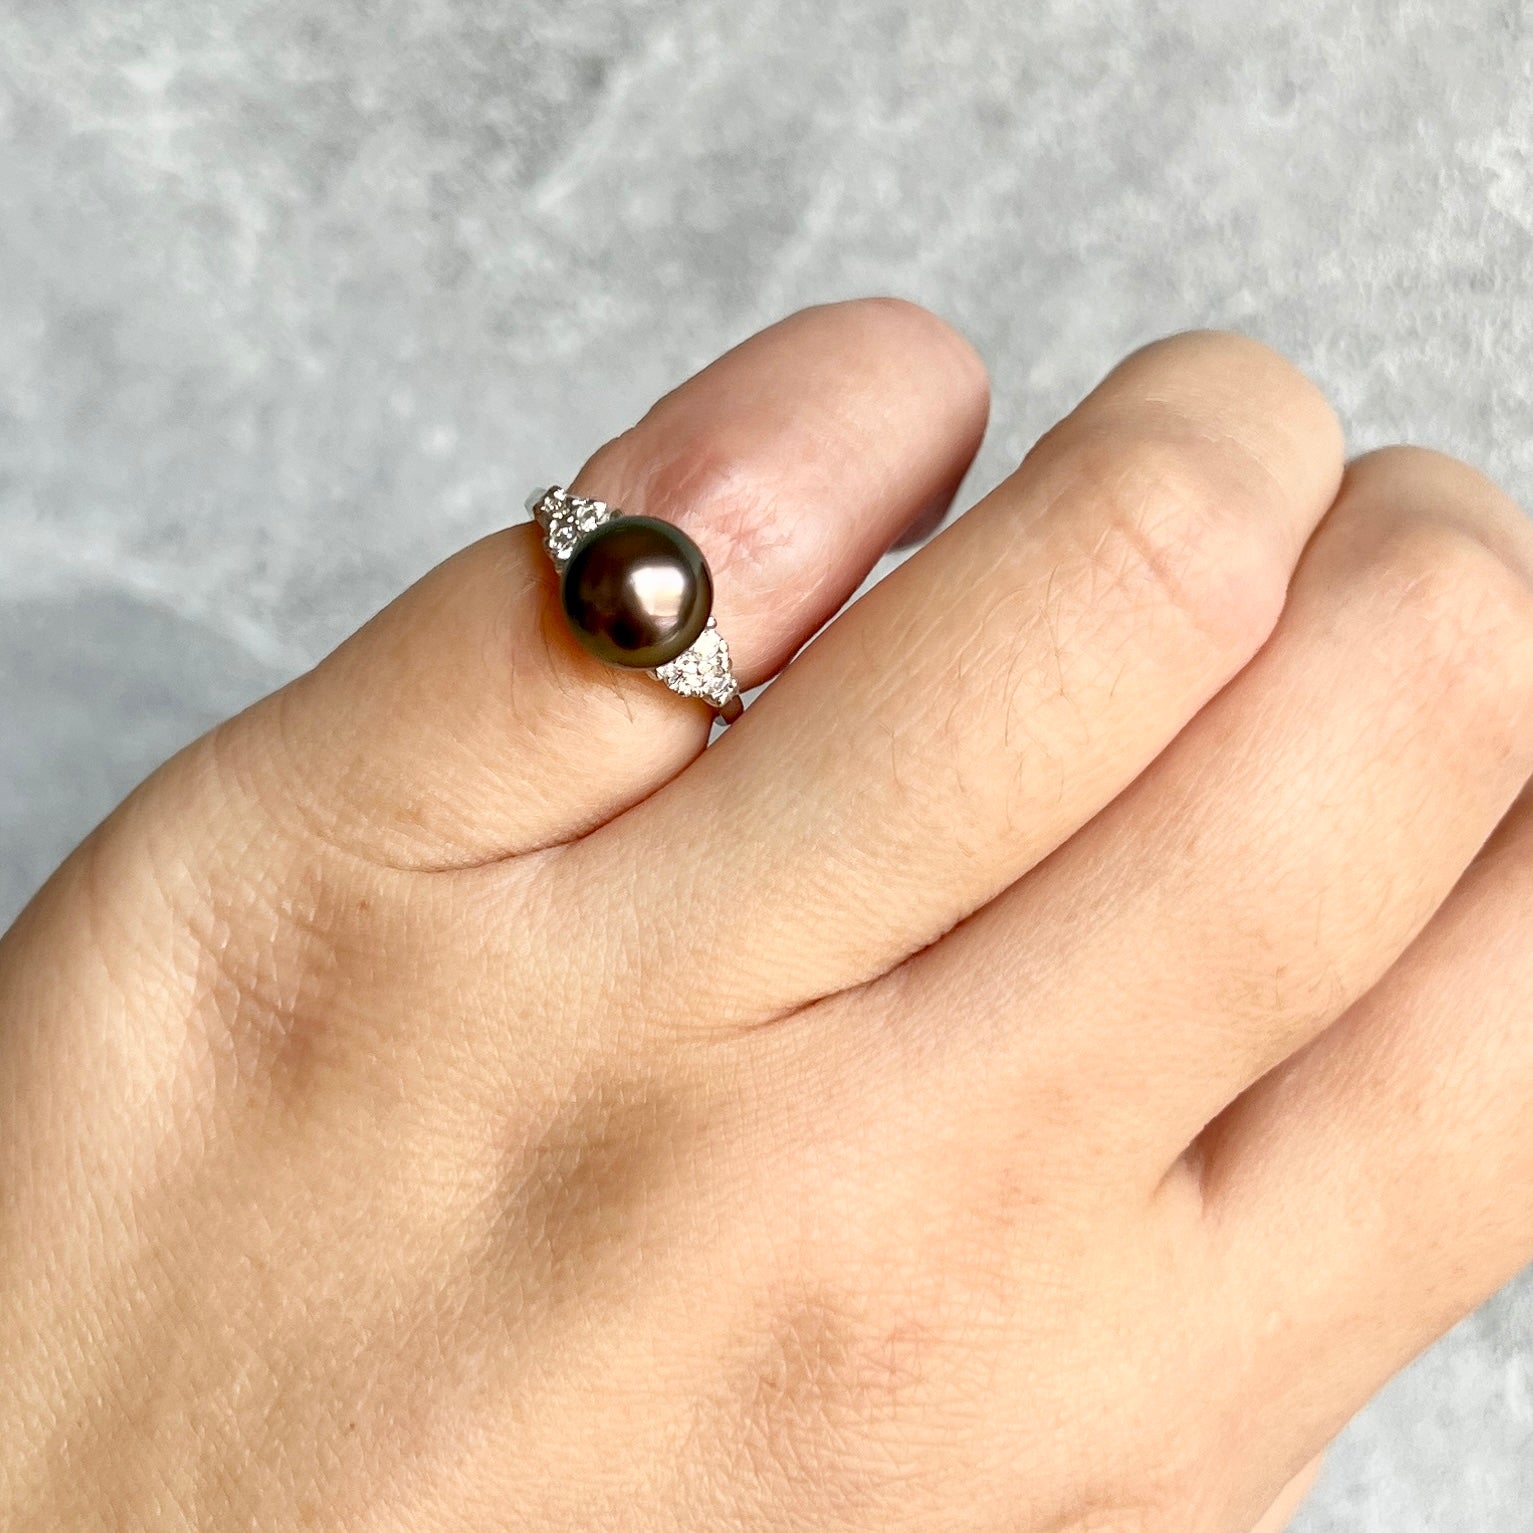 Tahitian Pearl Ring from the Engagement Collection by Seven Seas Pearls